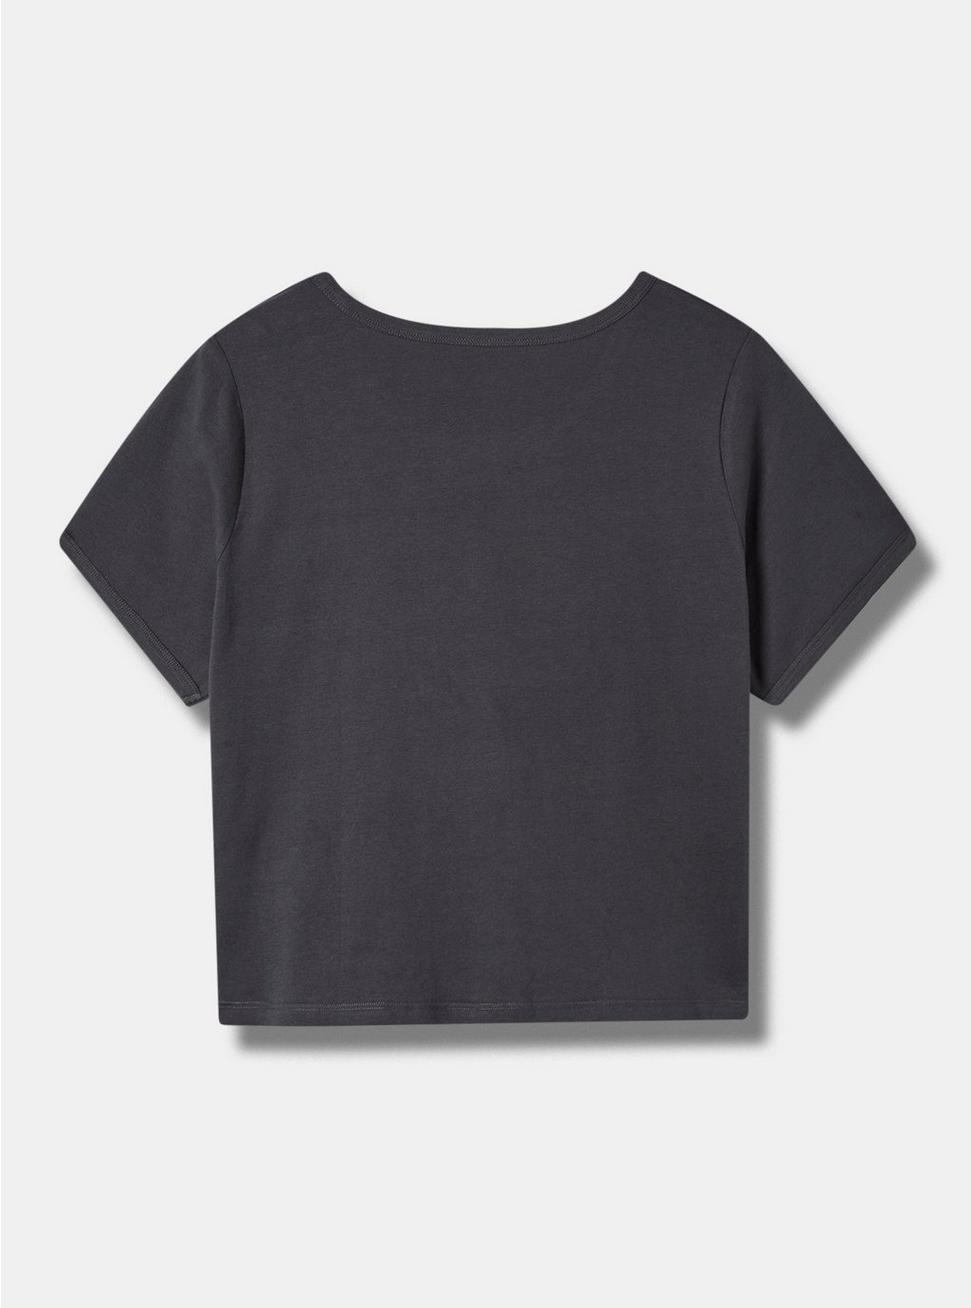 Polaroid Relaxed Fit Cotton Ringer Crop Tee, DEEP BLACK, alternate